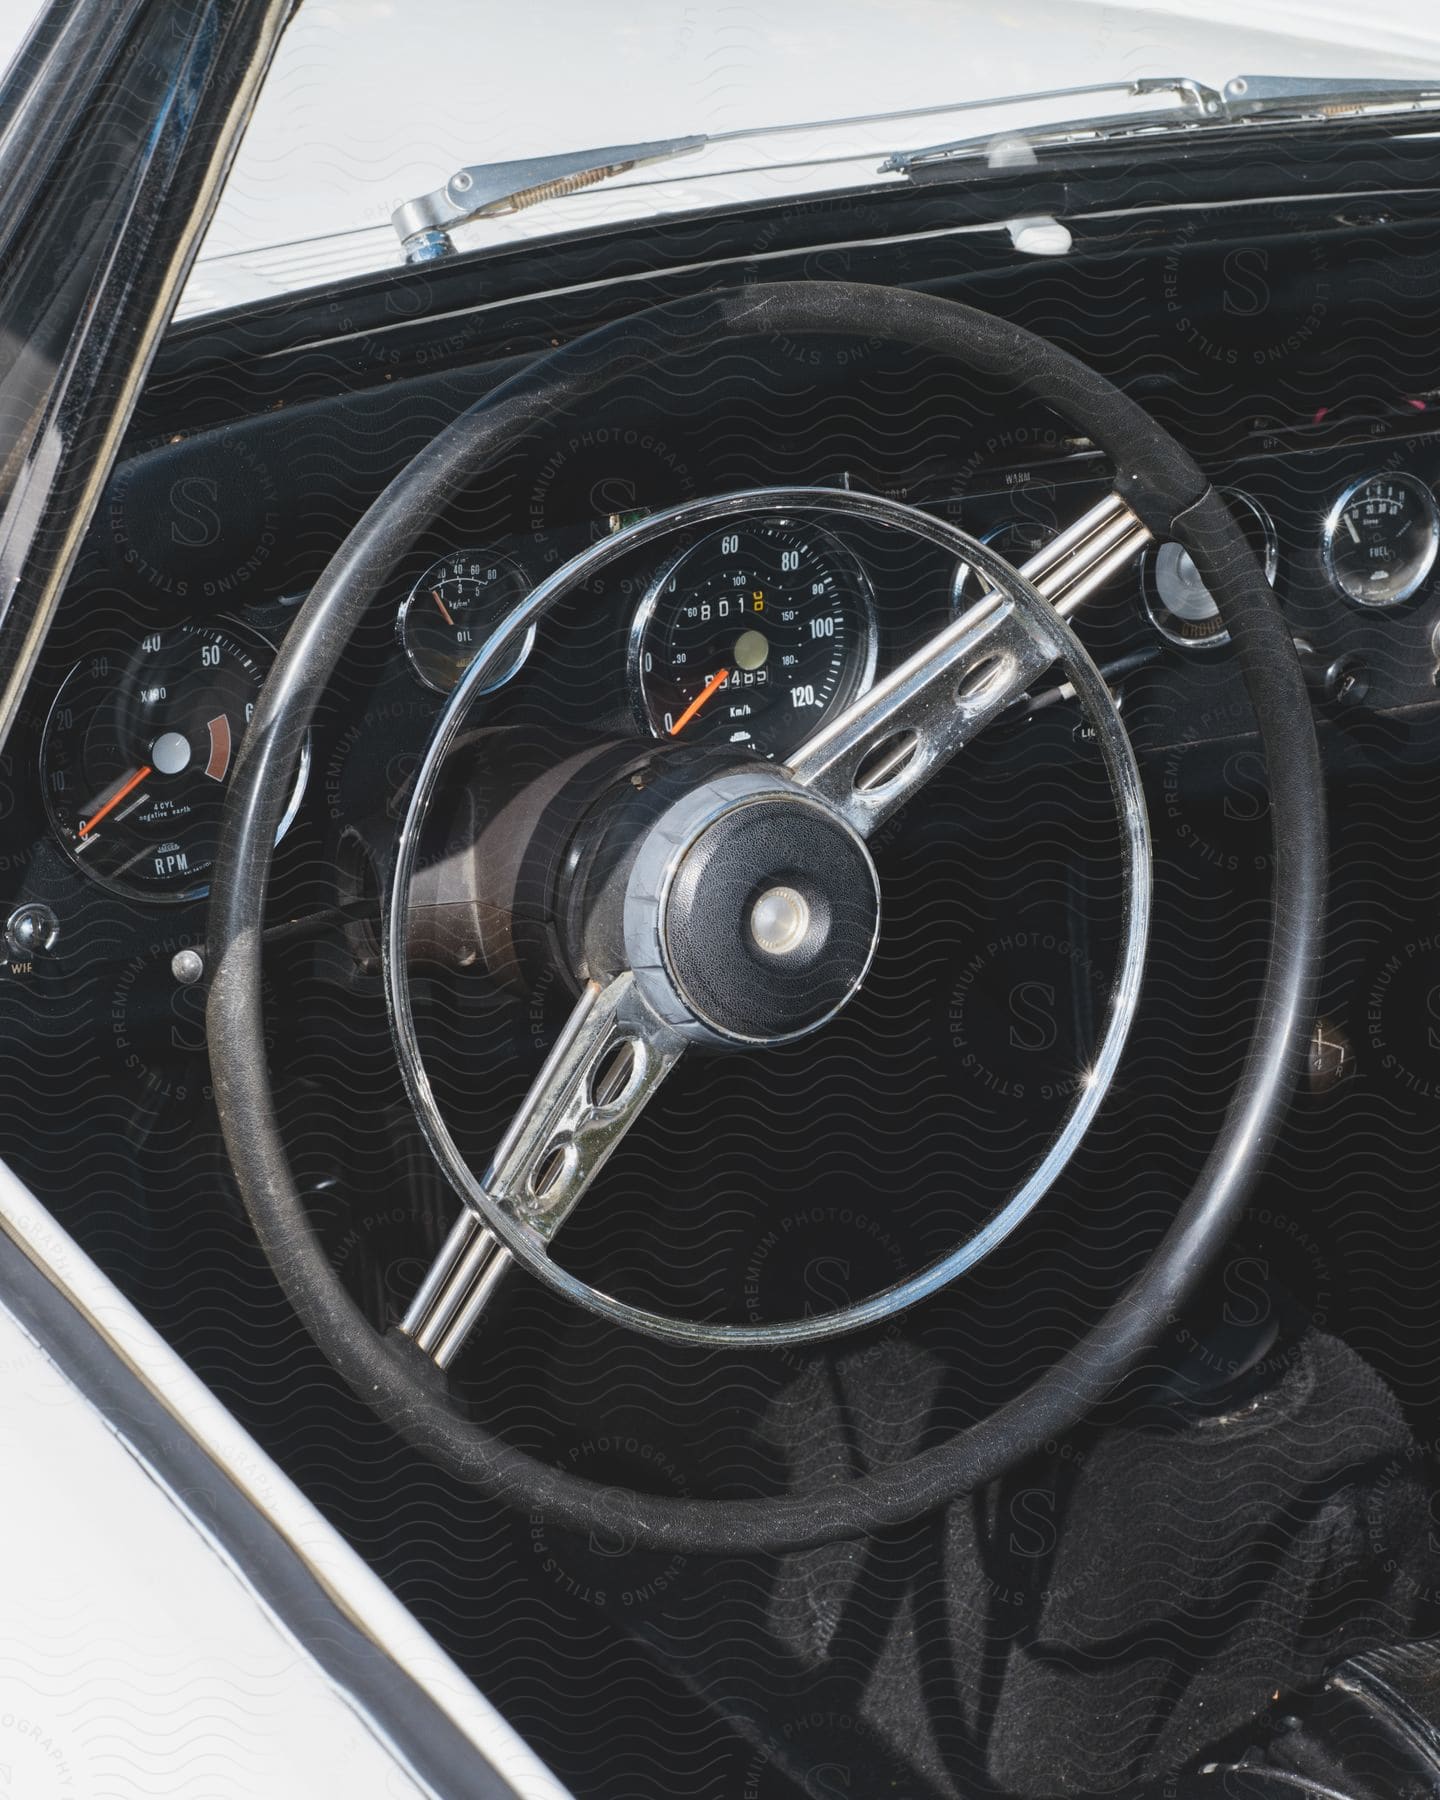 Inside an automobile the steering wheel is tilted in front of the gauges on the dashboard